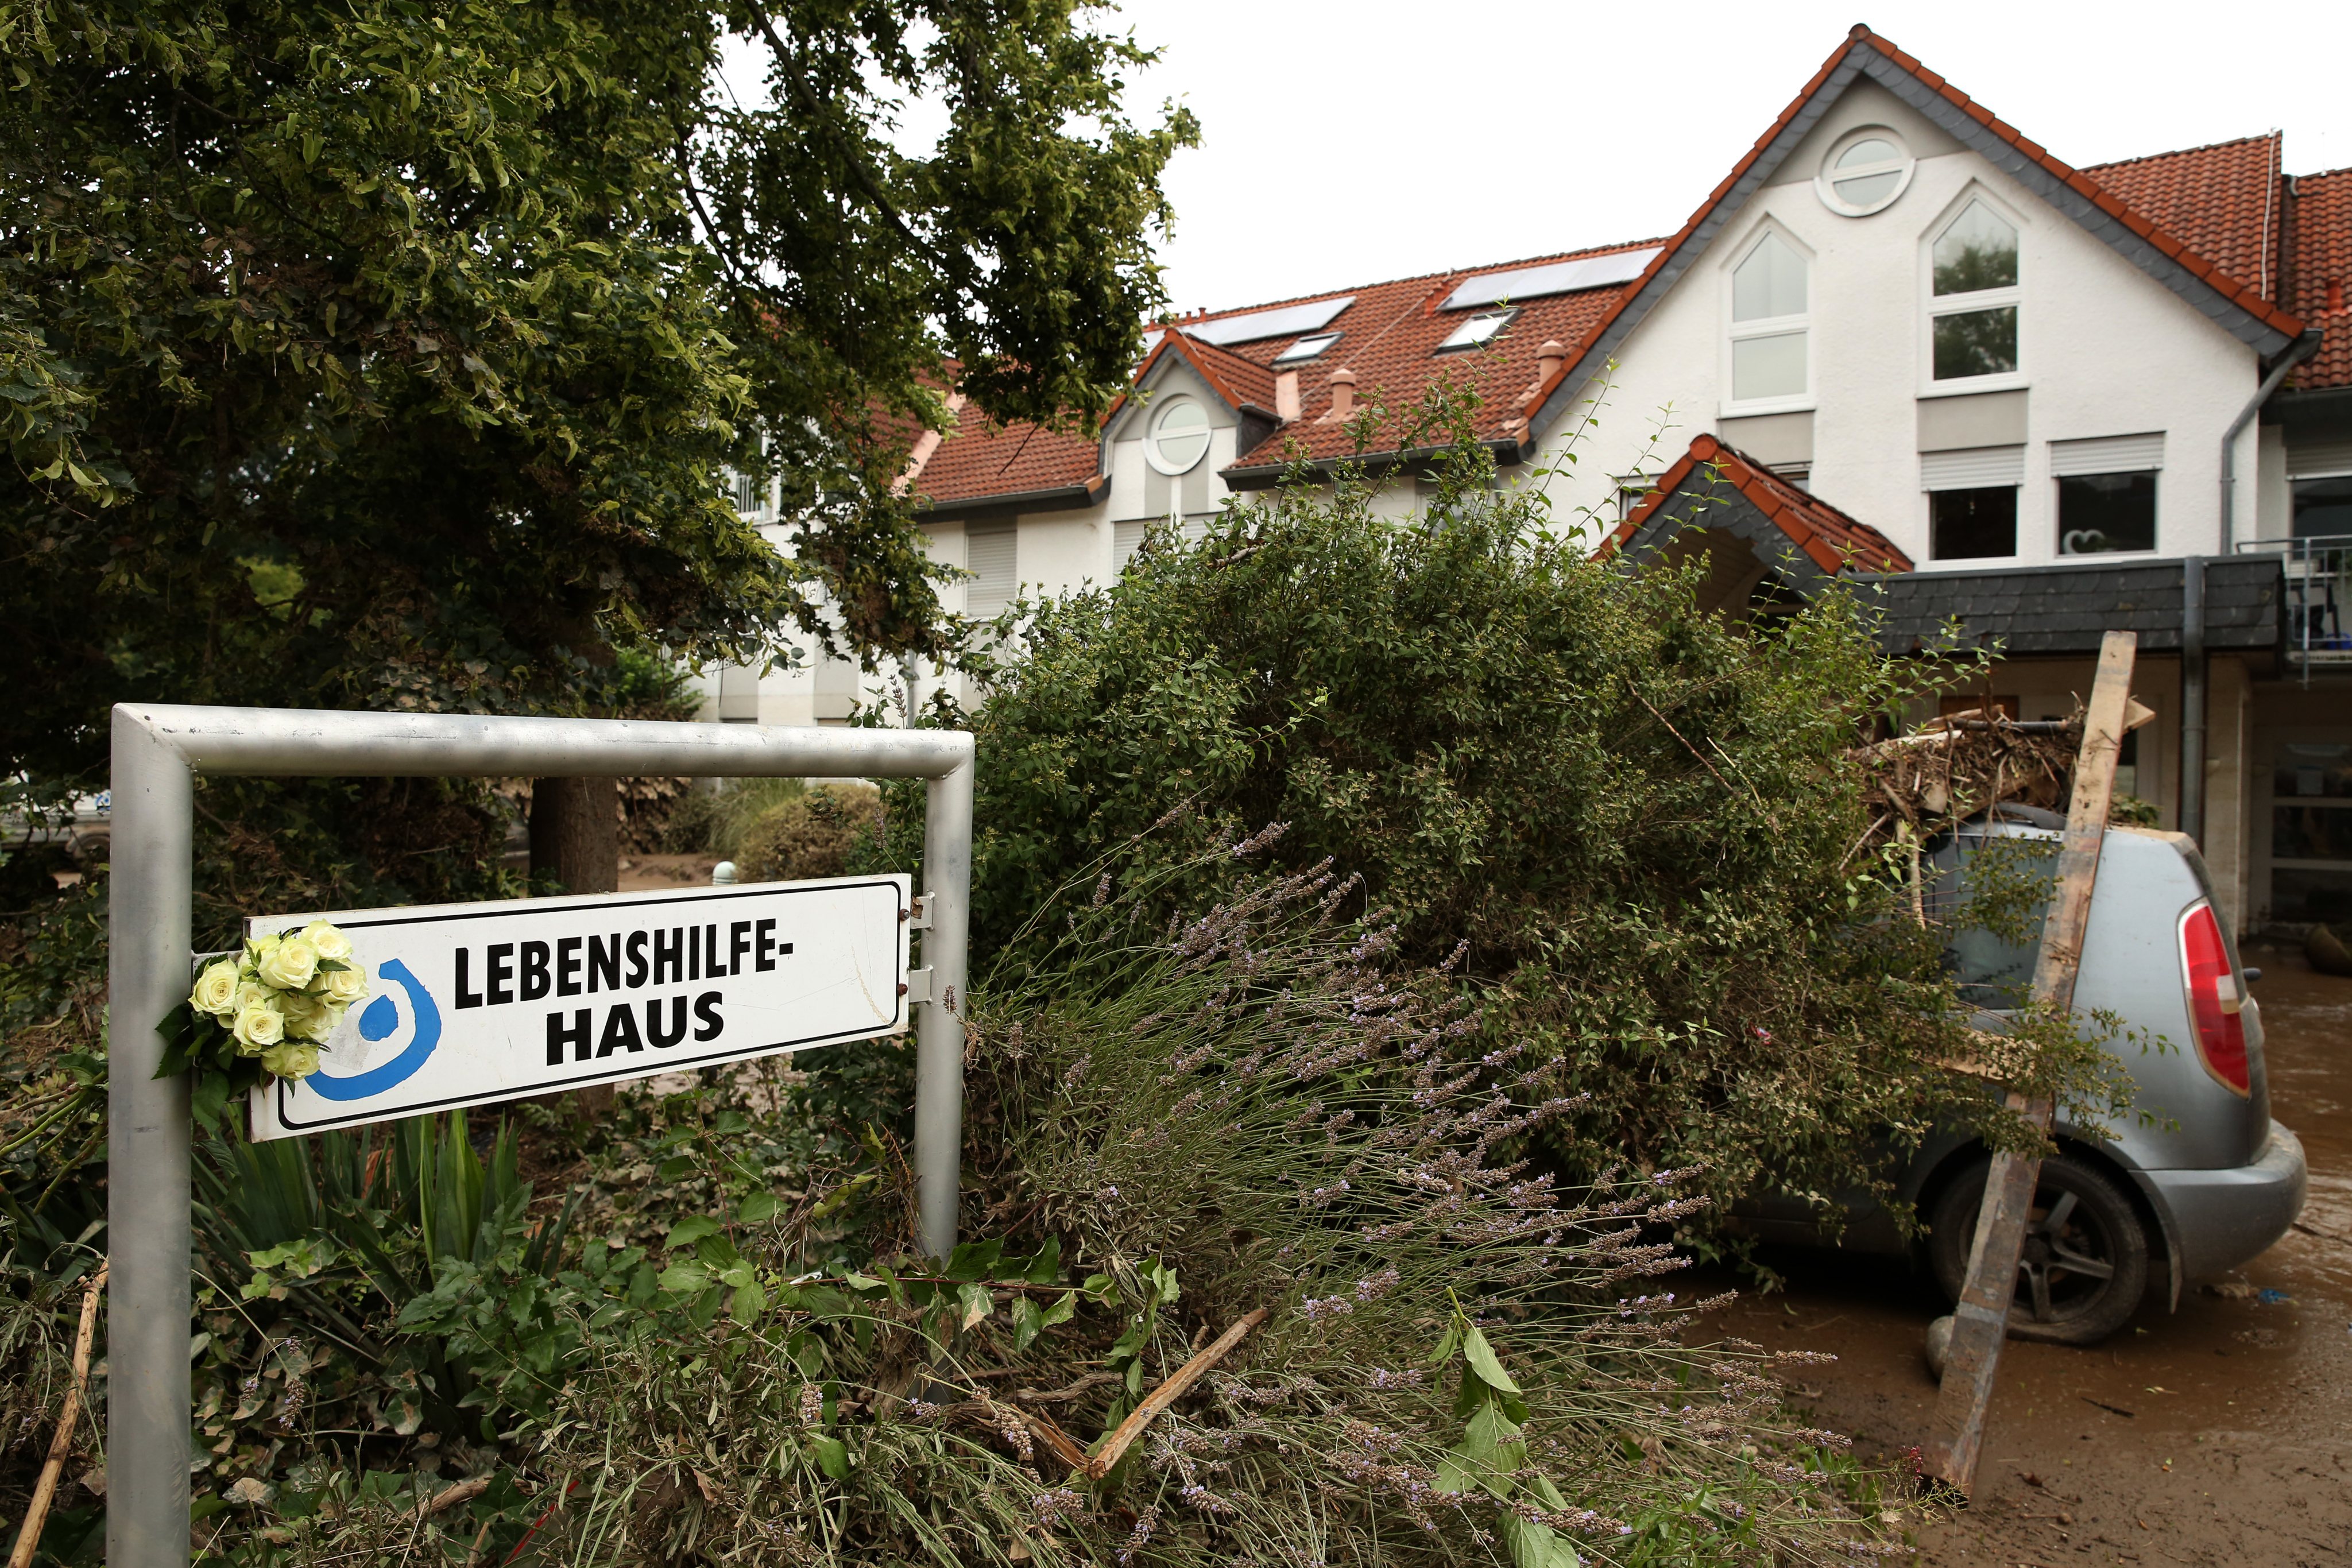 Germany Continues Evacuation And Rescue From Floods As Death Toll Rises